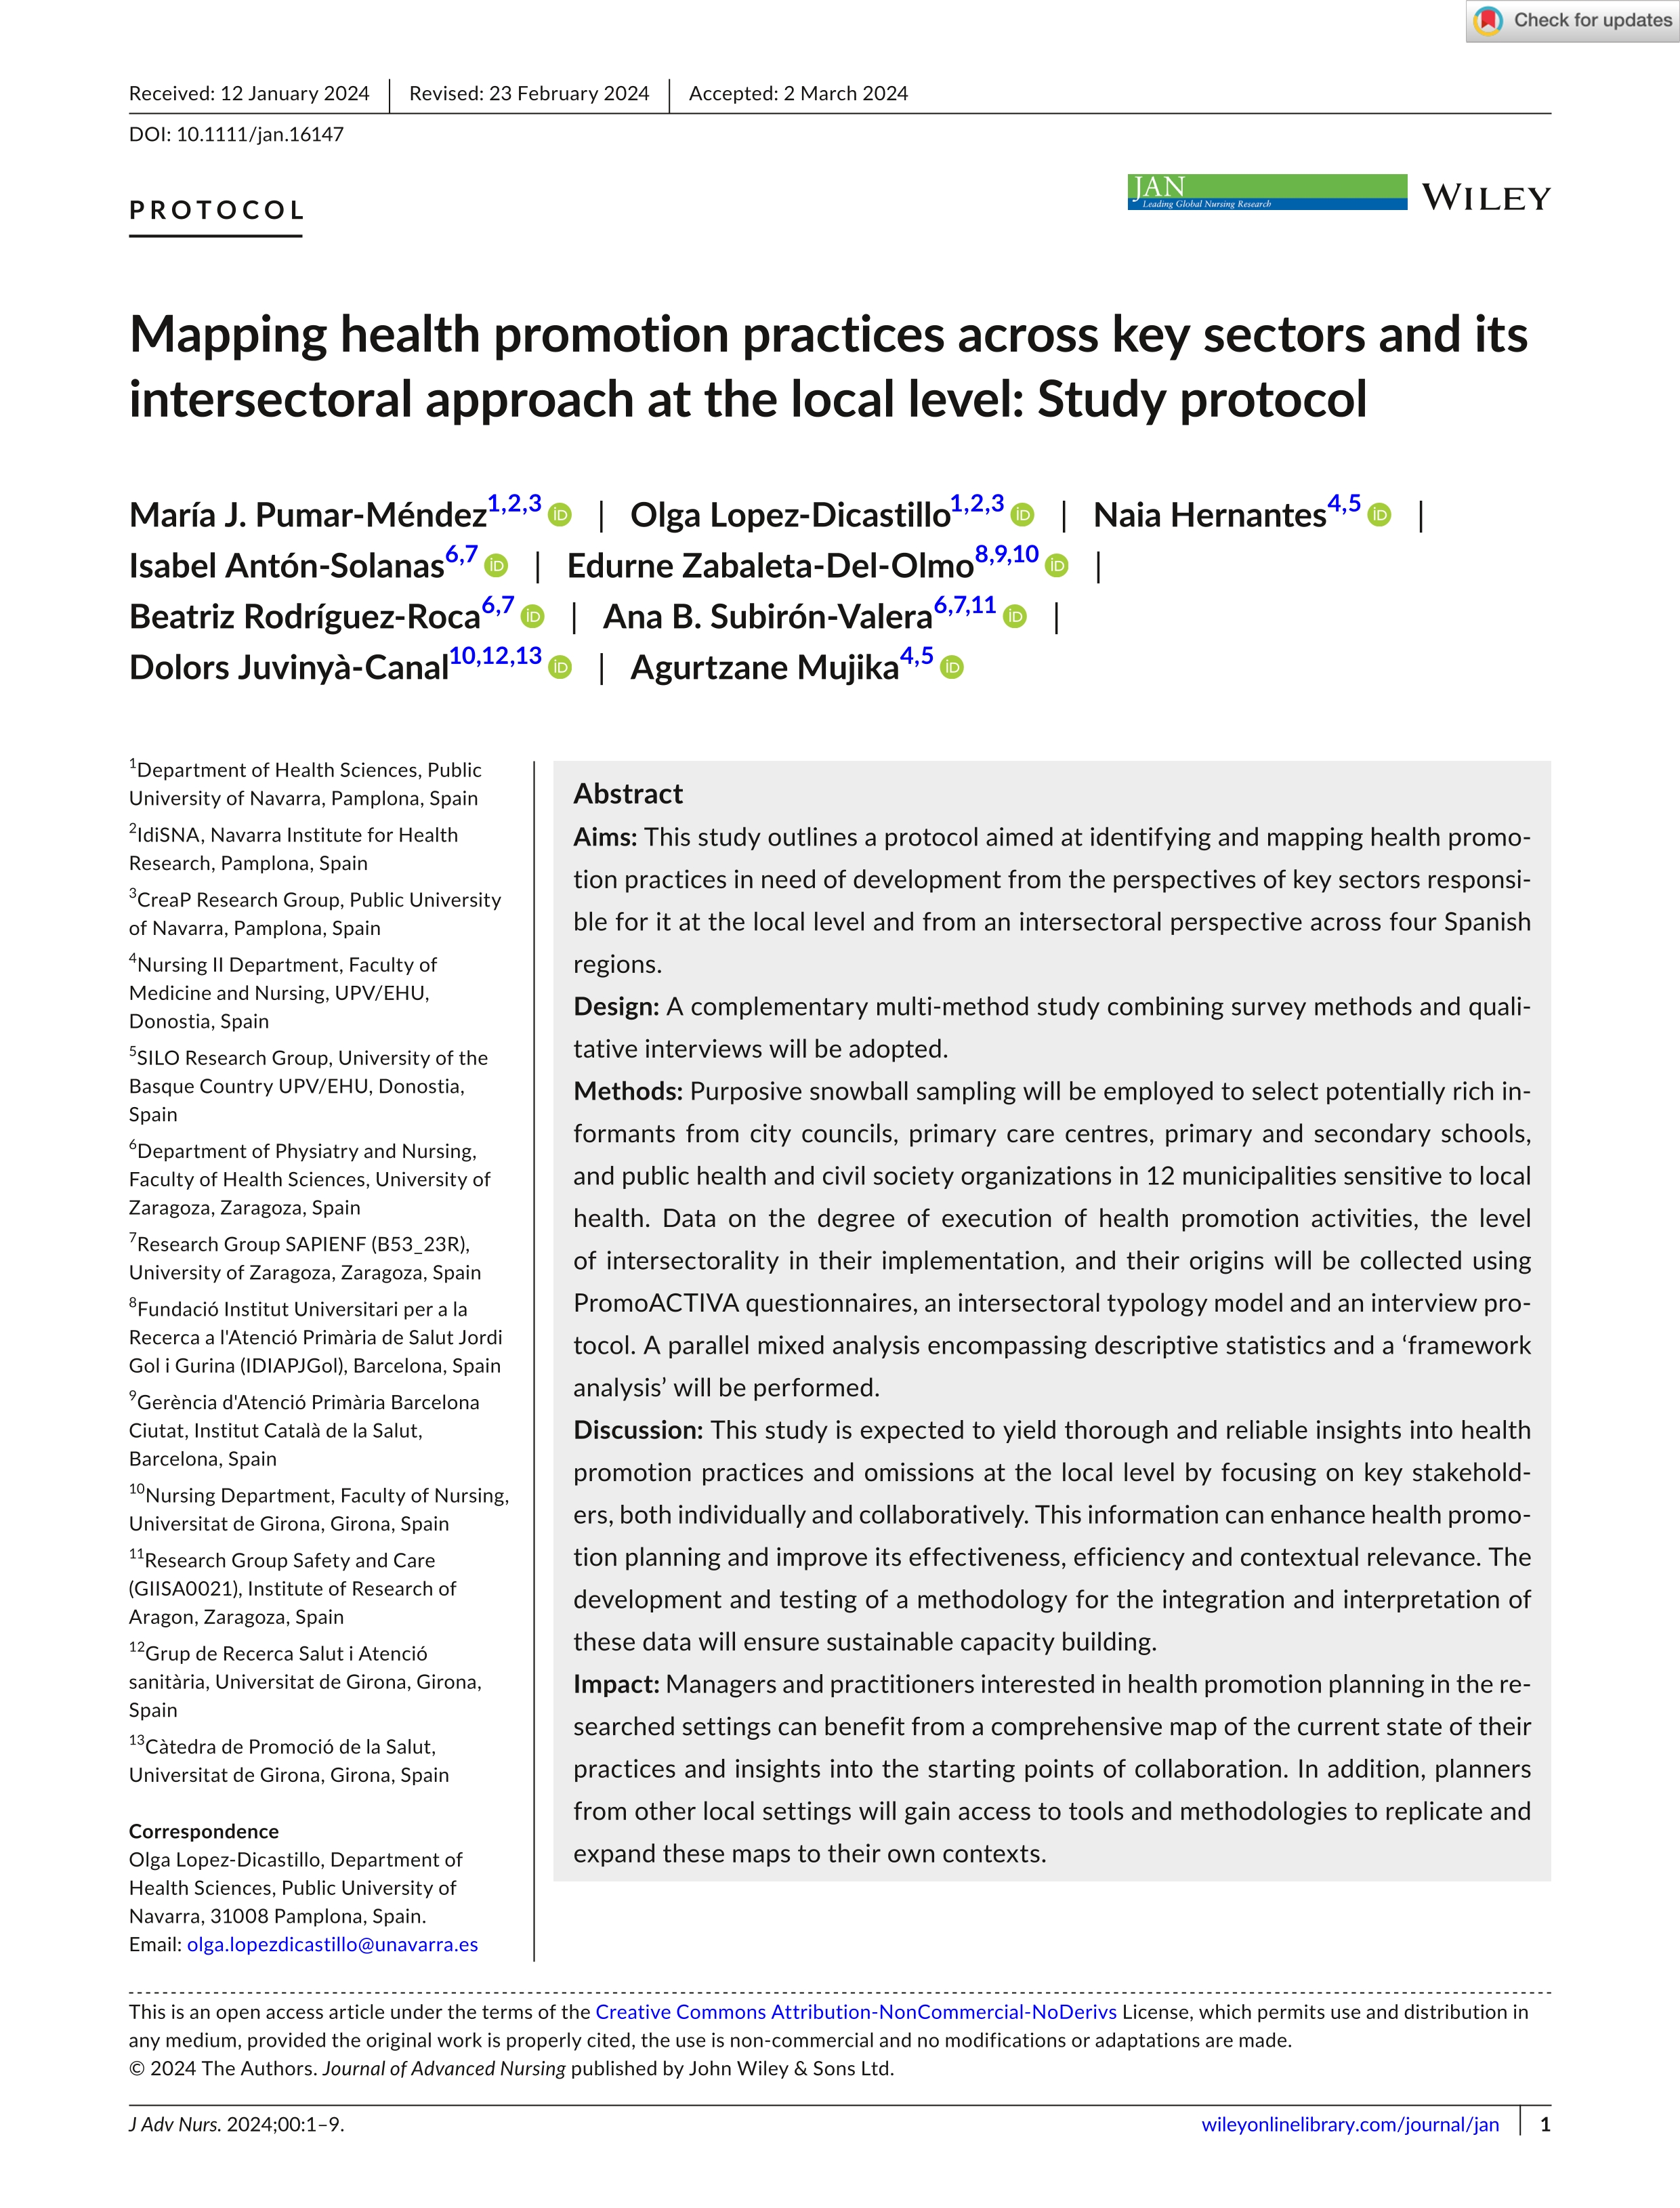 Mapping health promotion practices across key sectors and its intersectoral approach at the local level: Study protocol